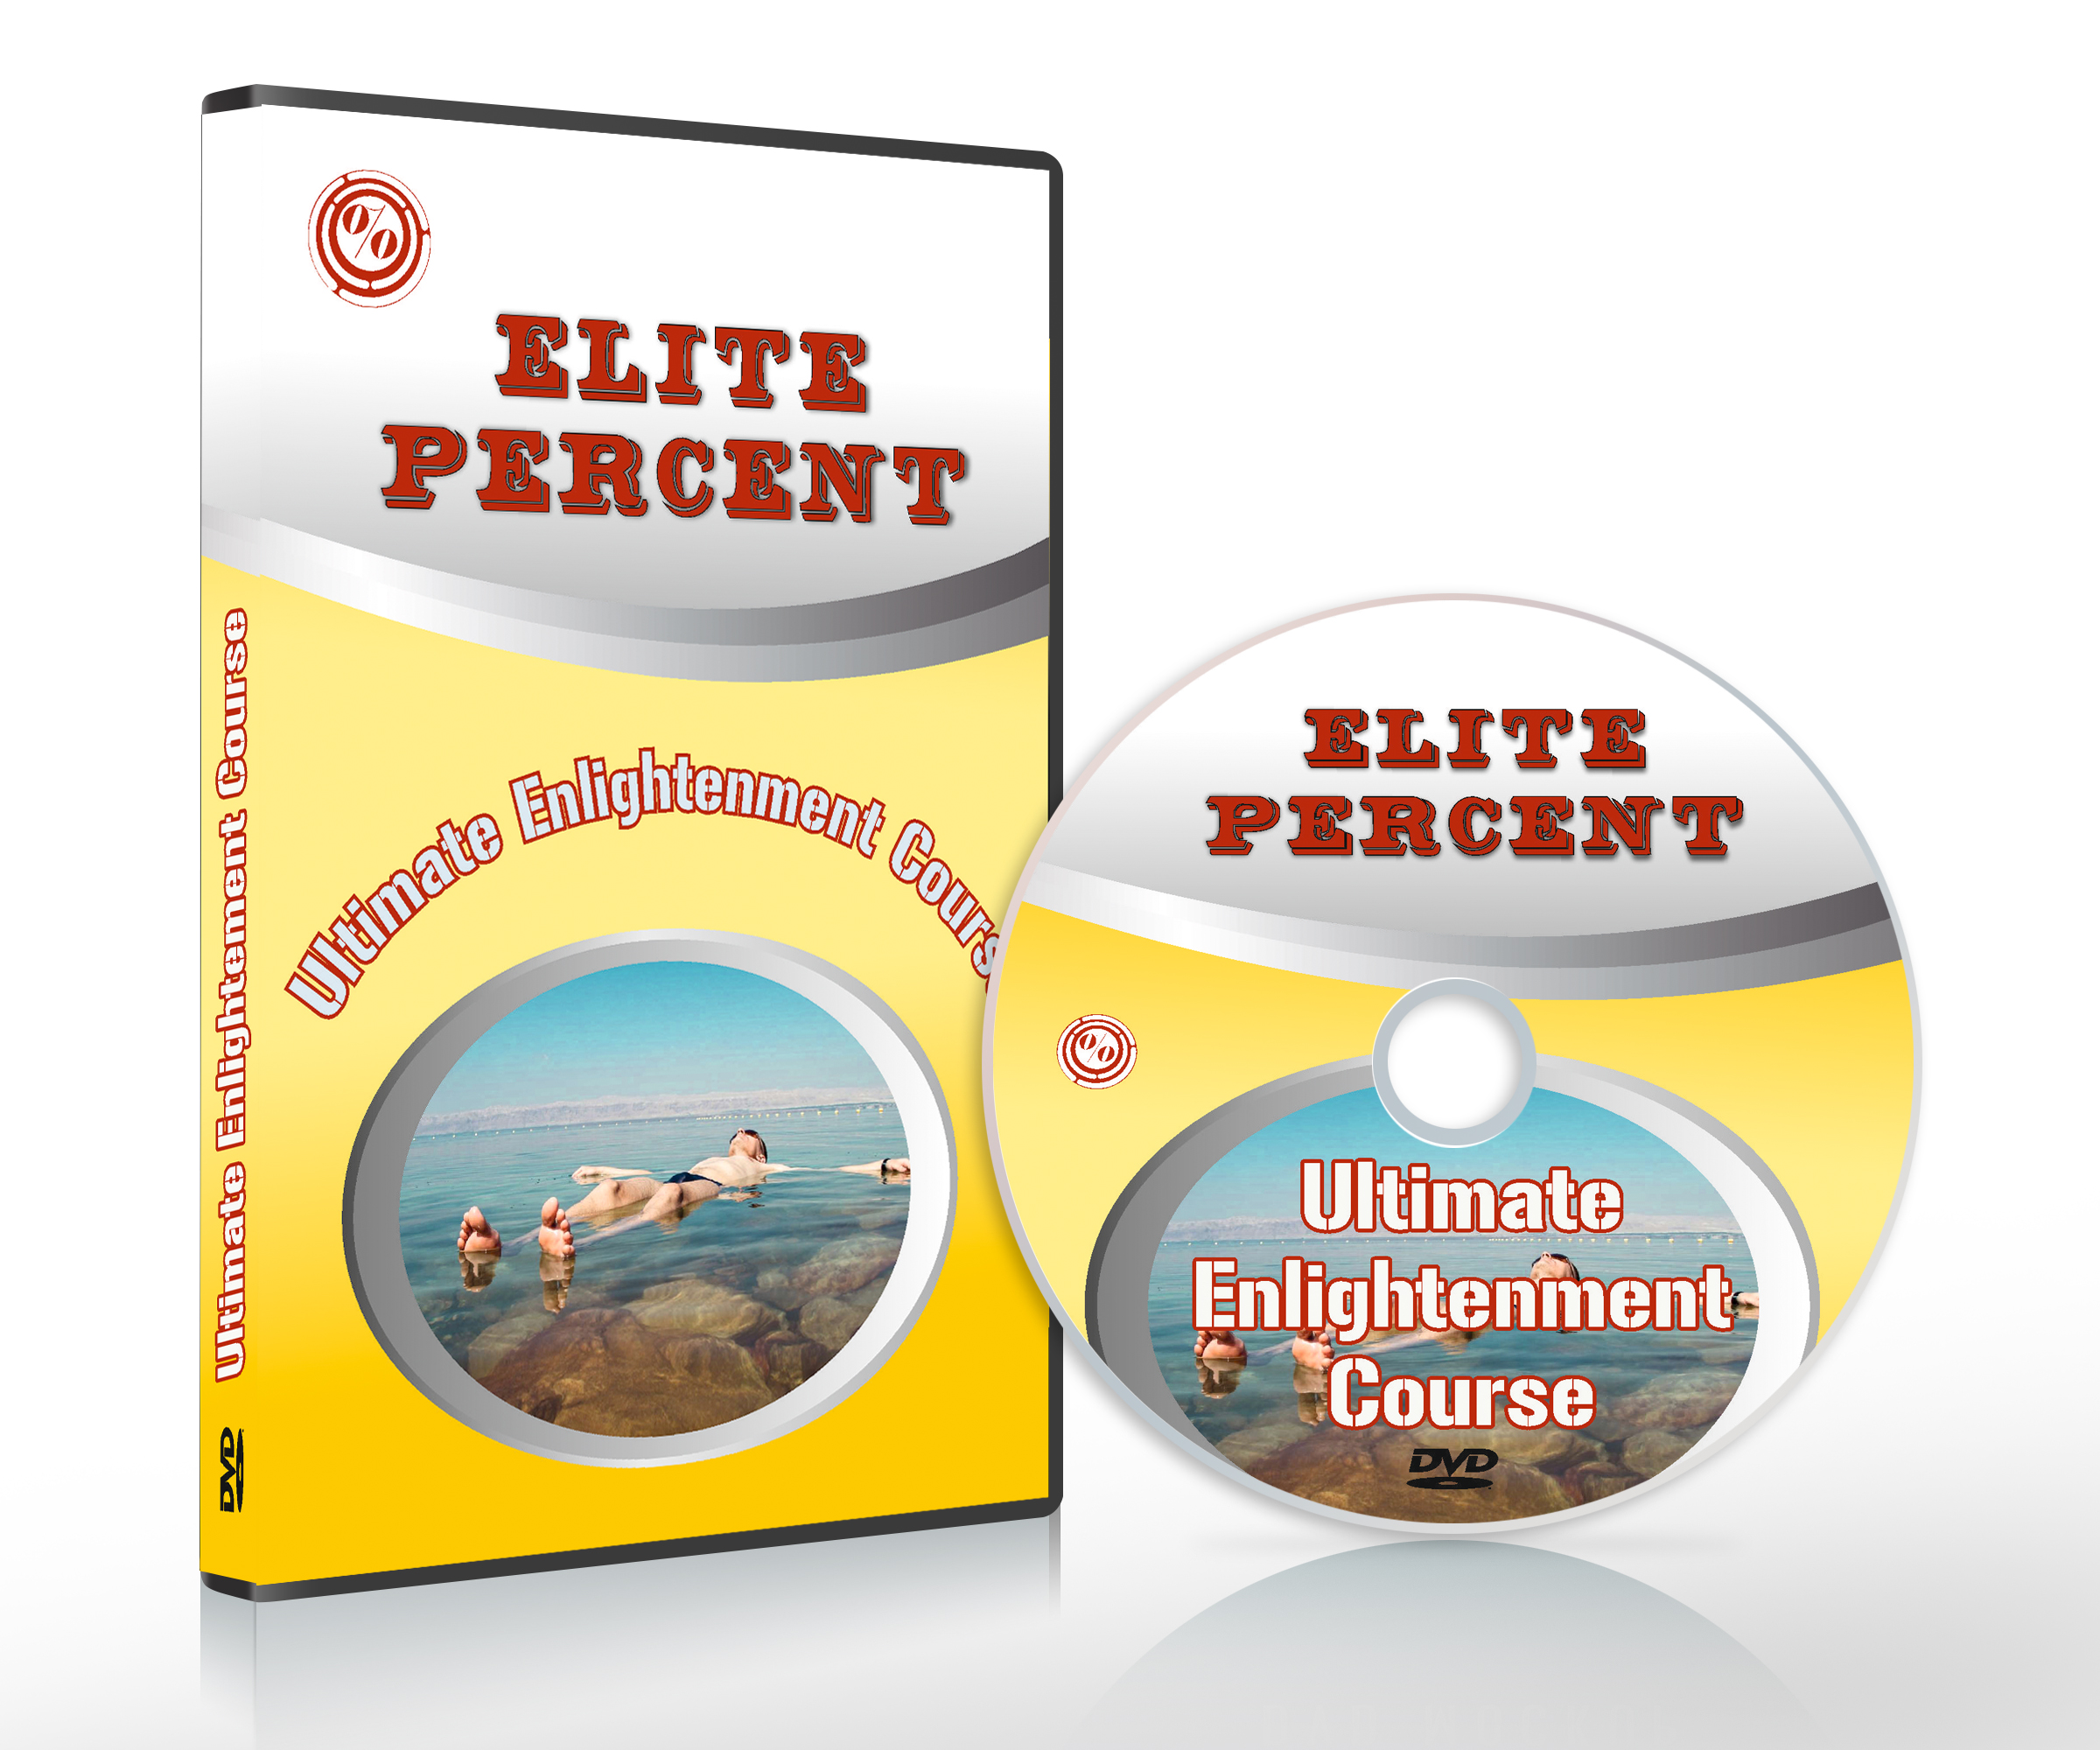 Ulimate Enlightenment Course